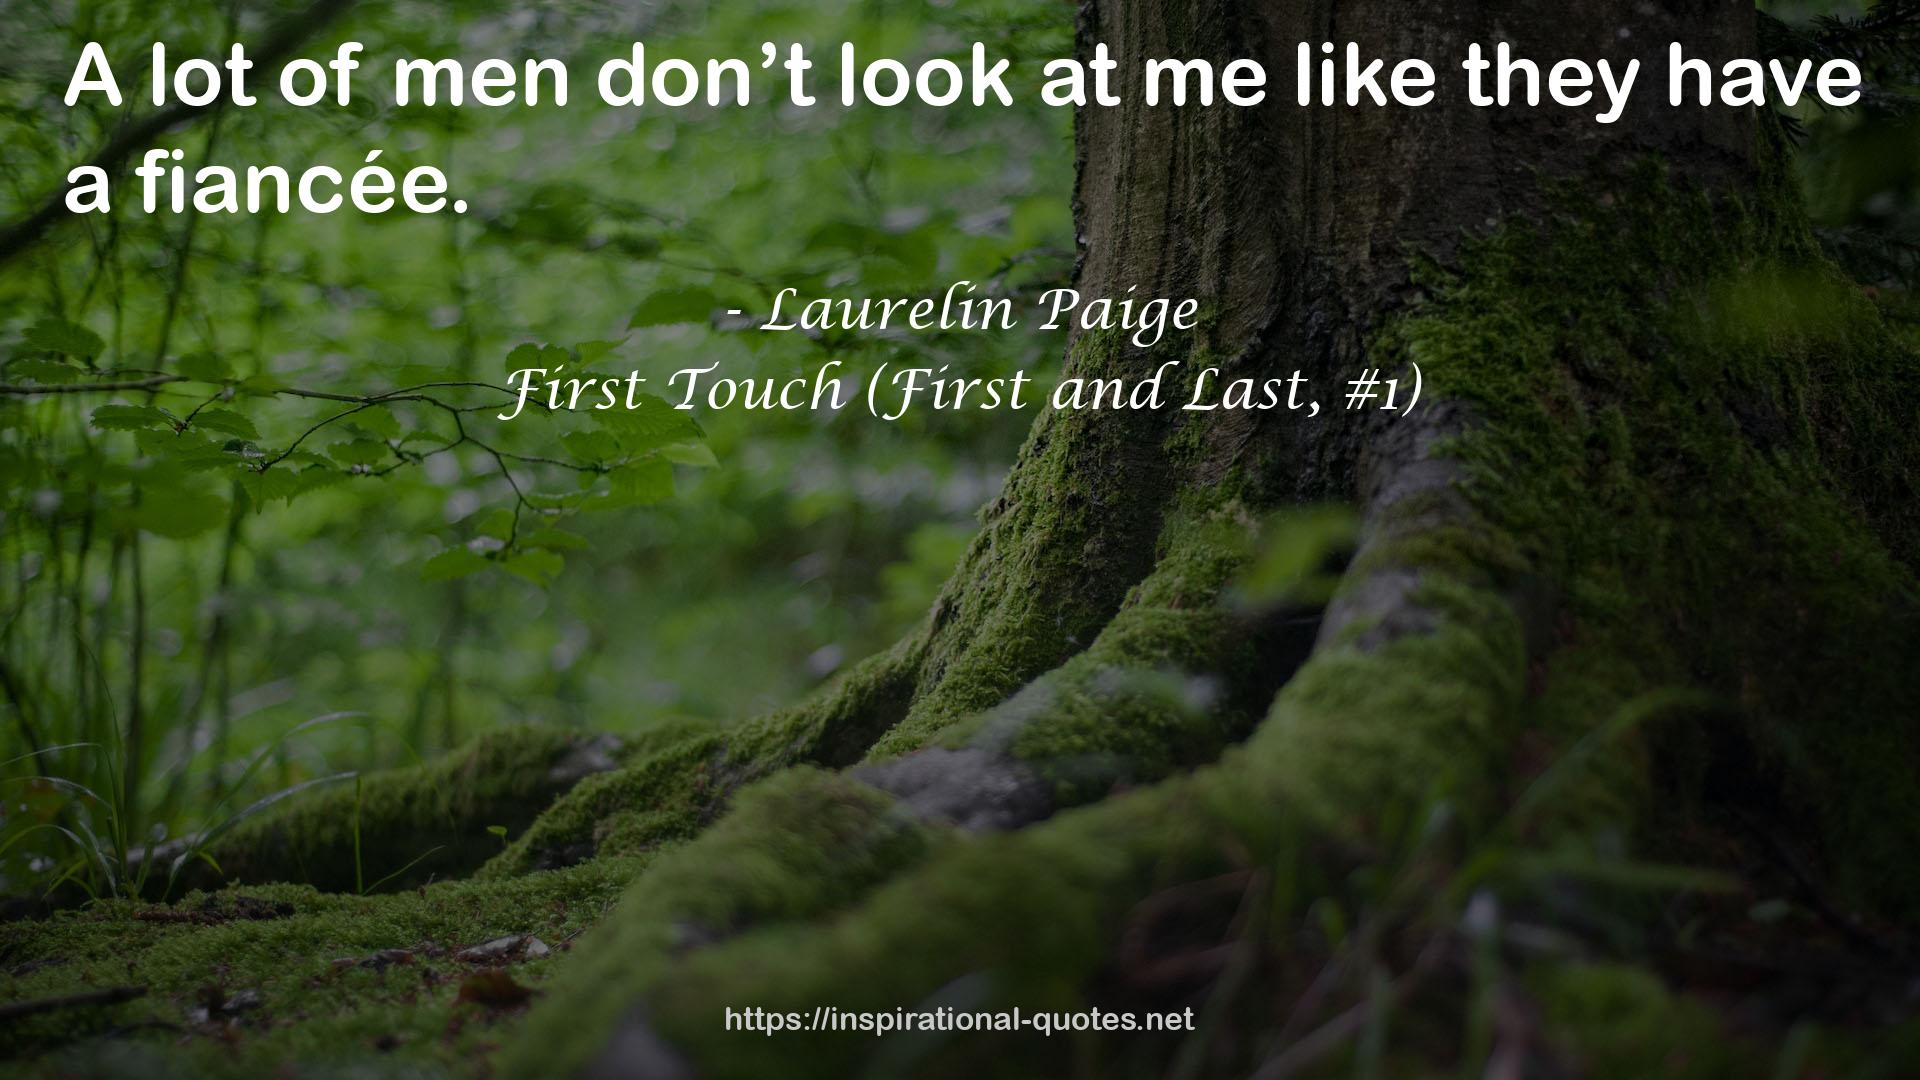 First Touch (First and Last, #1) QUOTES